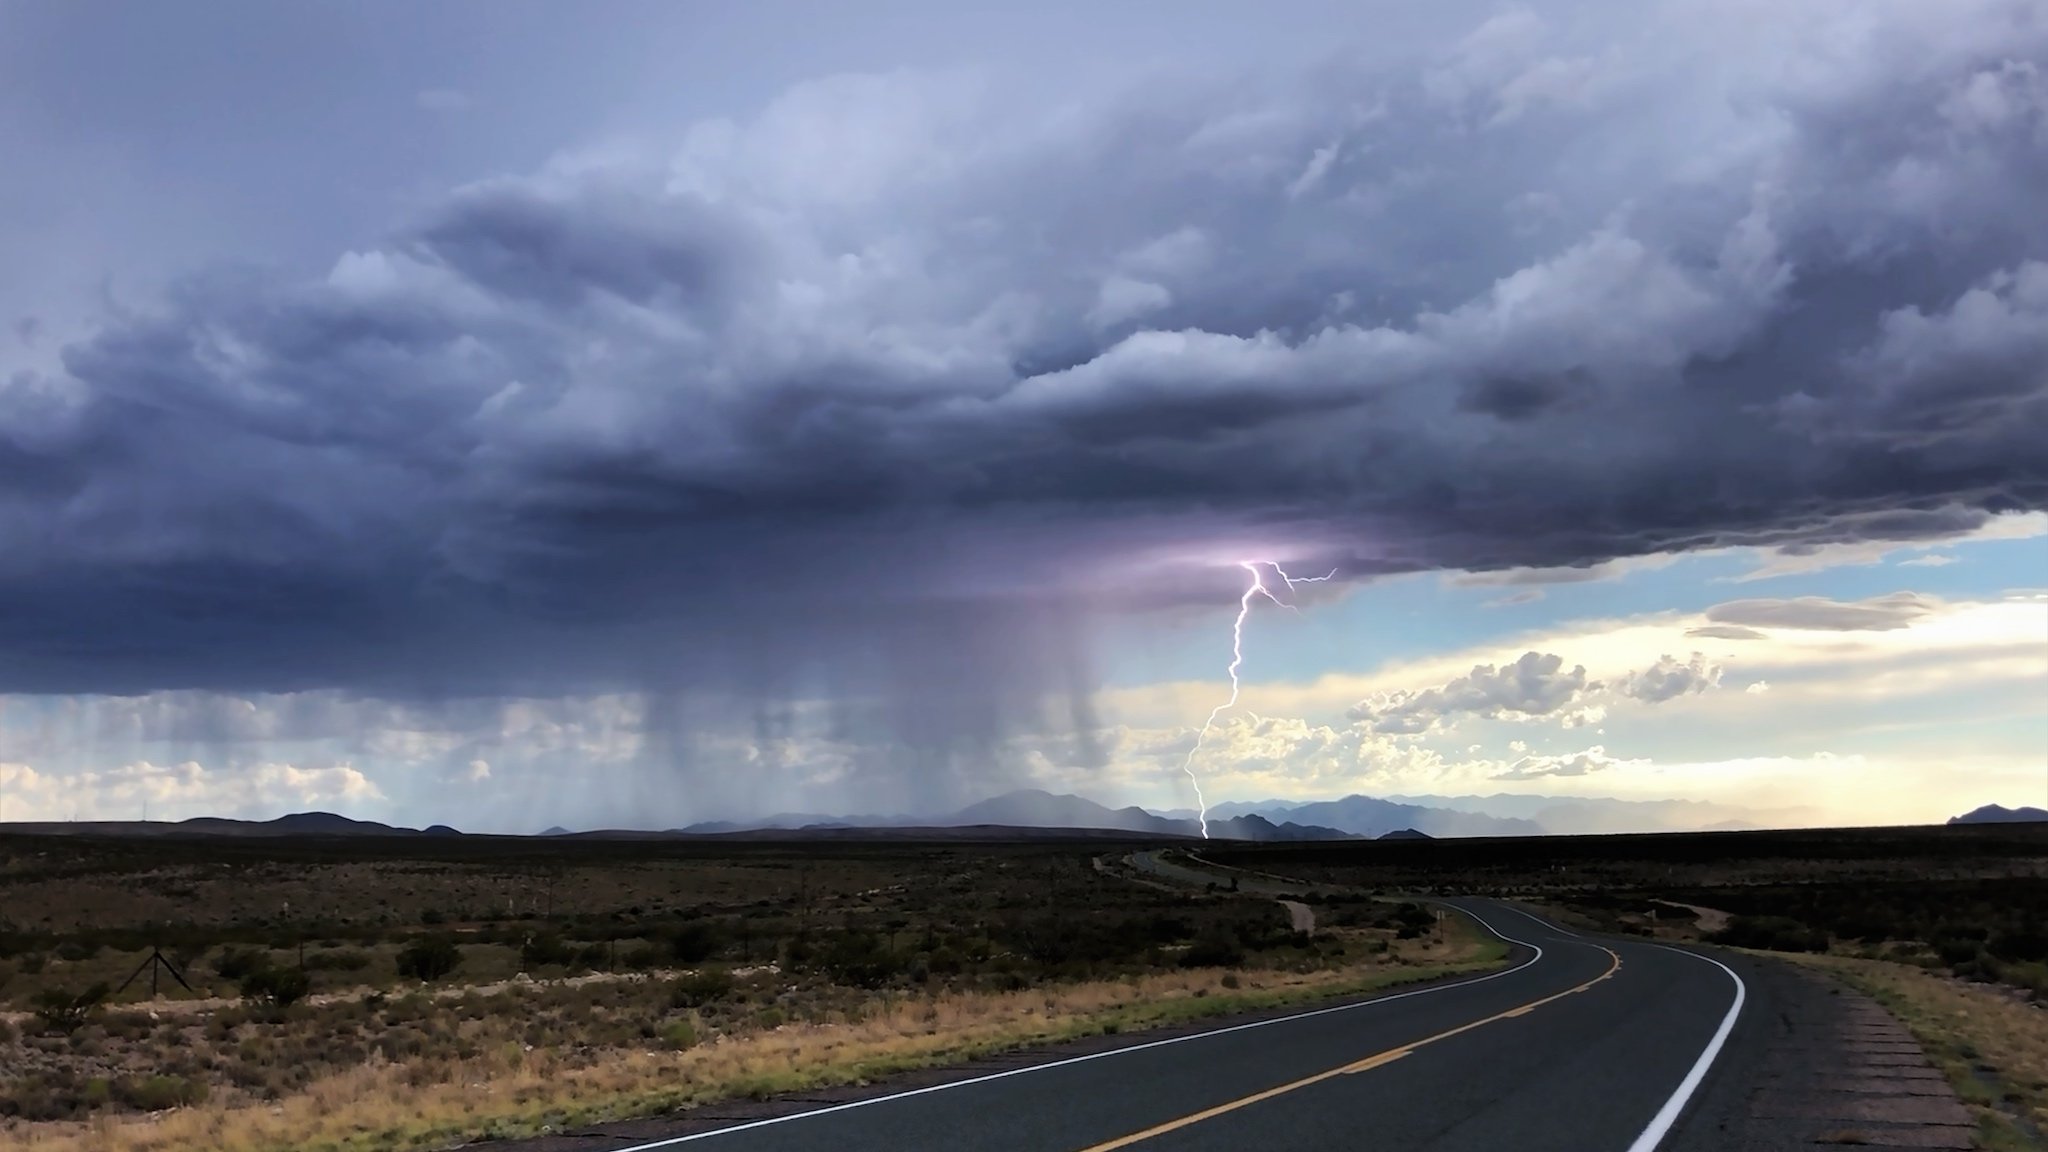 A wide-angled photo of a dramatic stormcloud over a small rural highway. A bolt of lightning shoots from the cloud in the distance, where intense rain can also be seen.